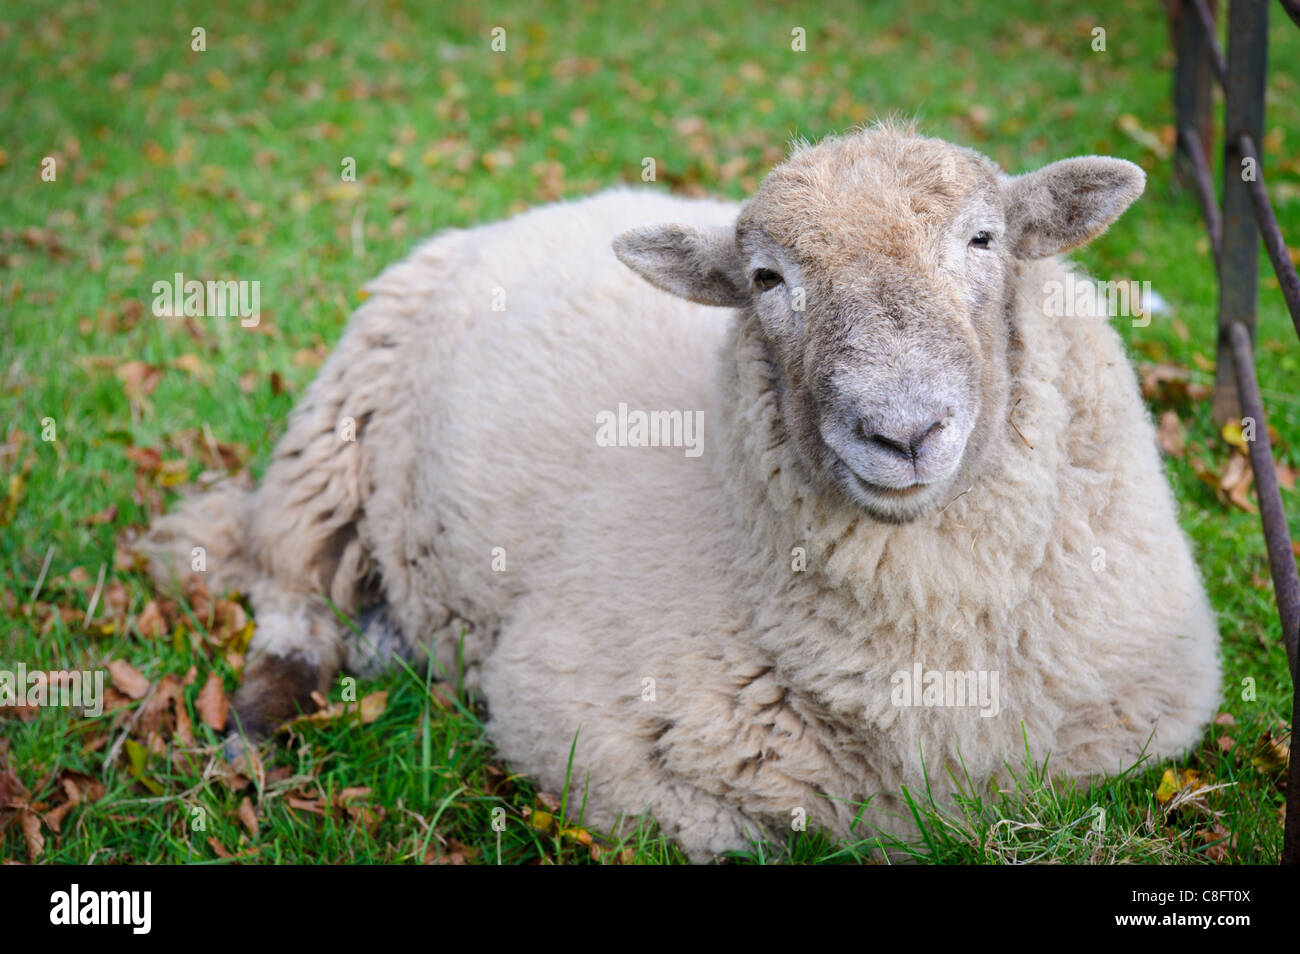 A sheep at rest at The National History Museum, St Fagans, Cardiff. Stock Photo